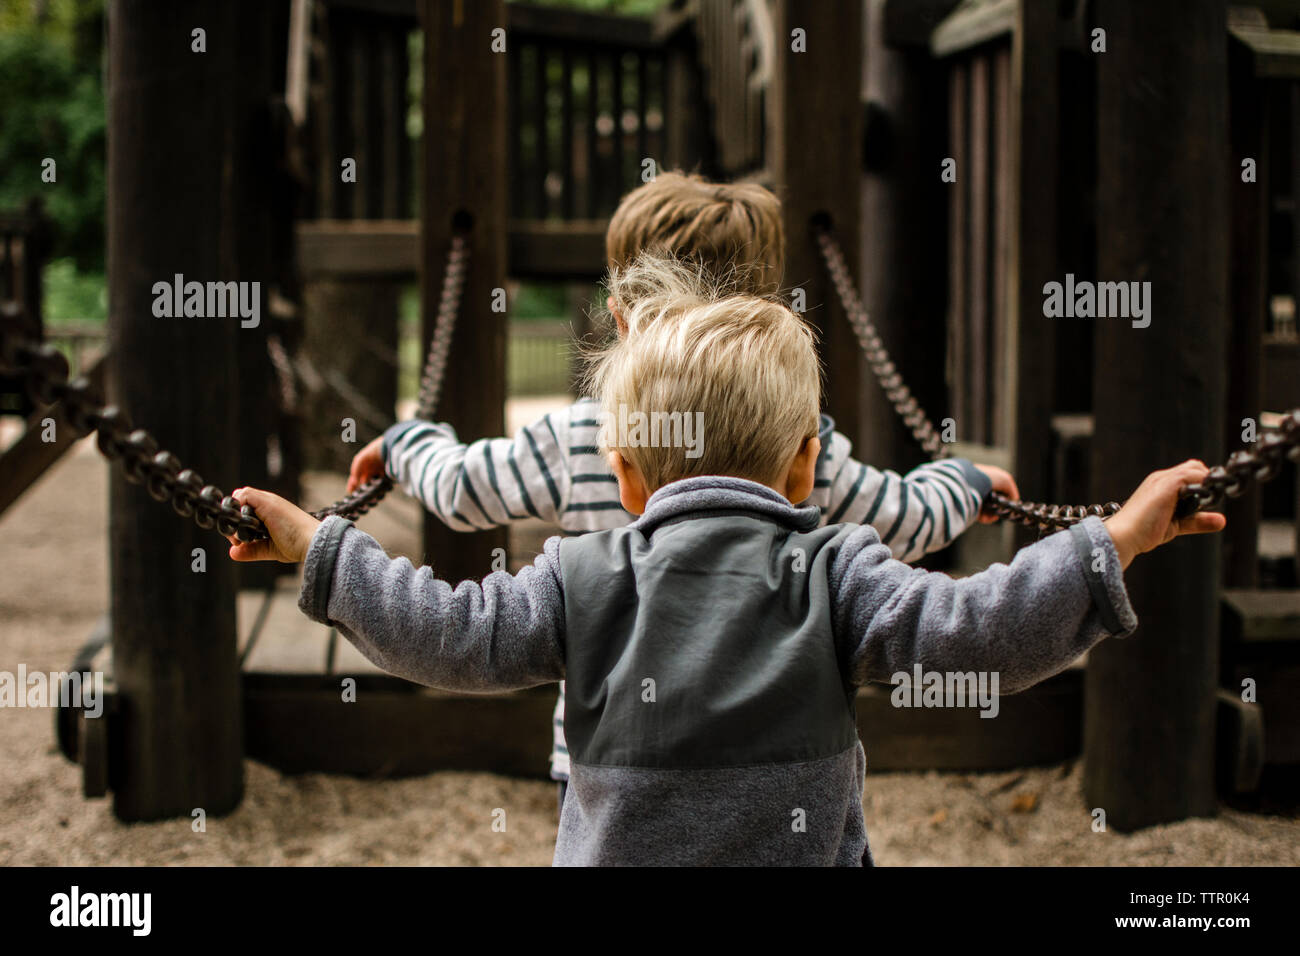 Rear view of brothers holding chain against jungle gym Stock Photo